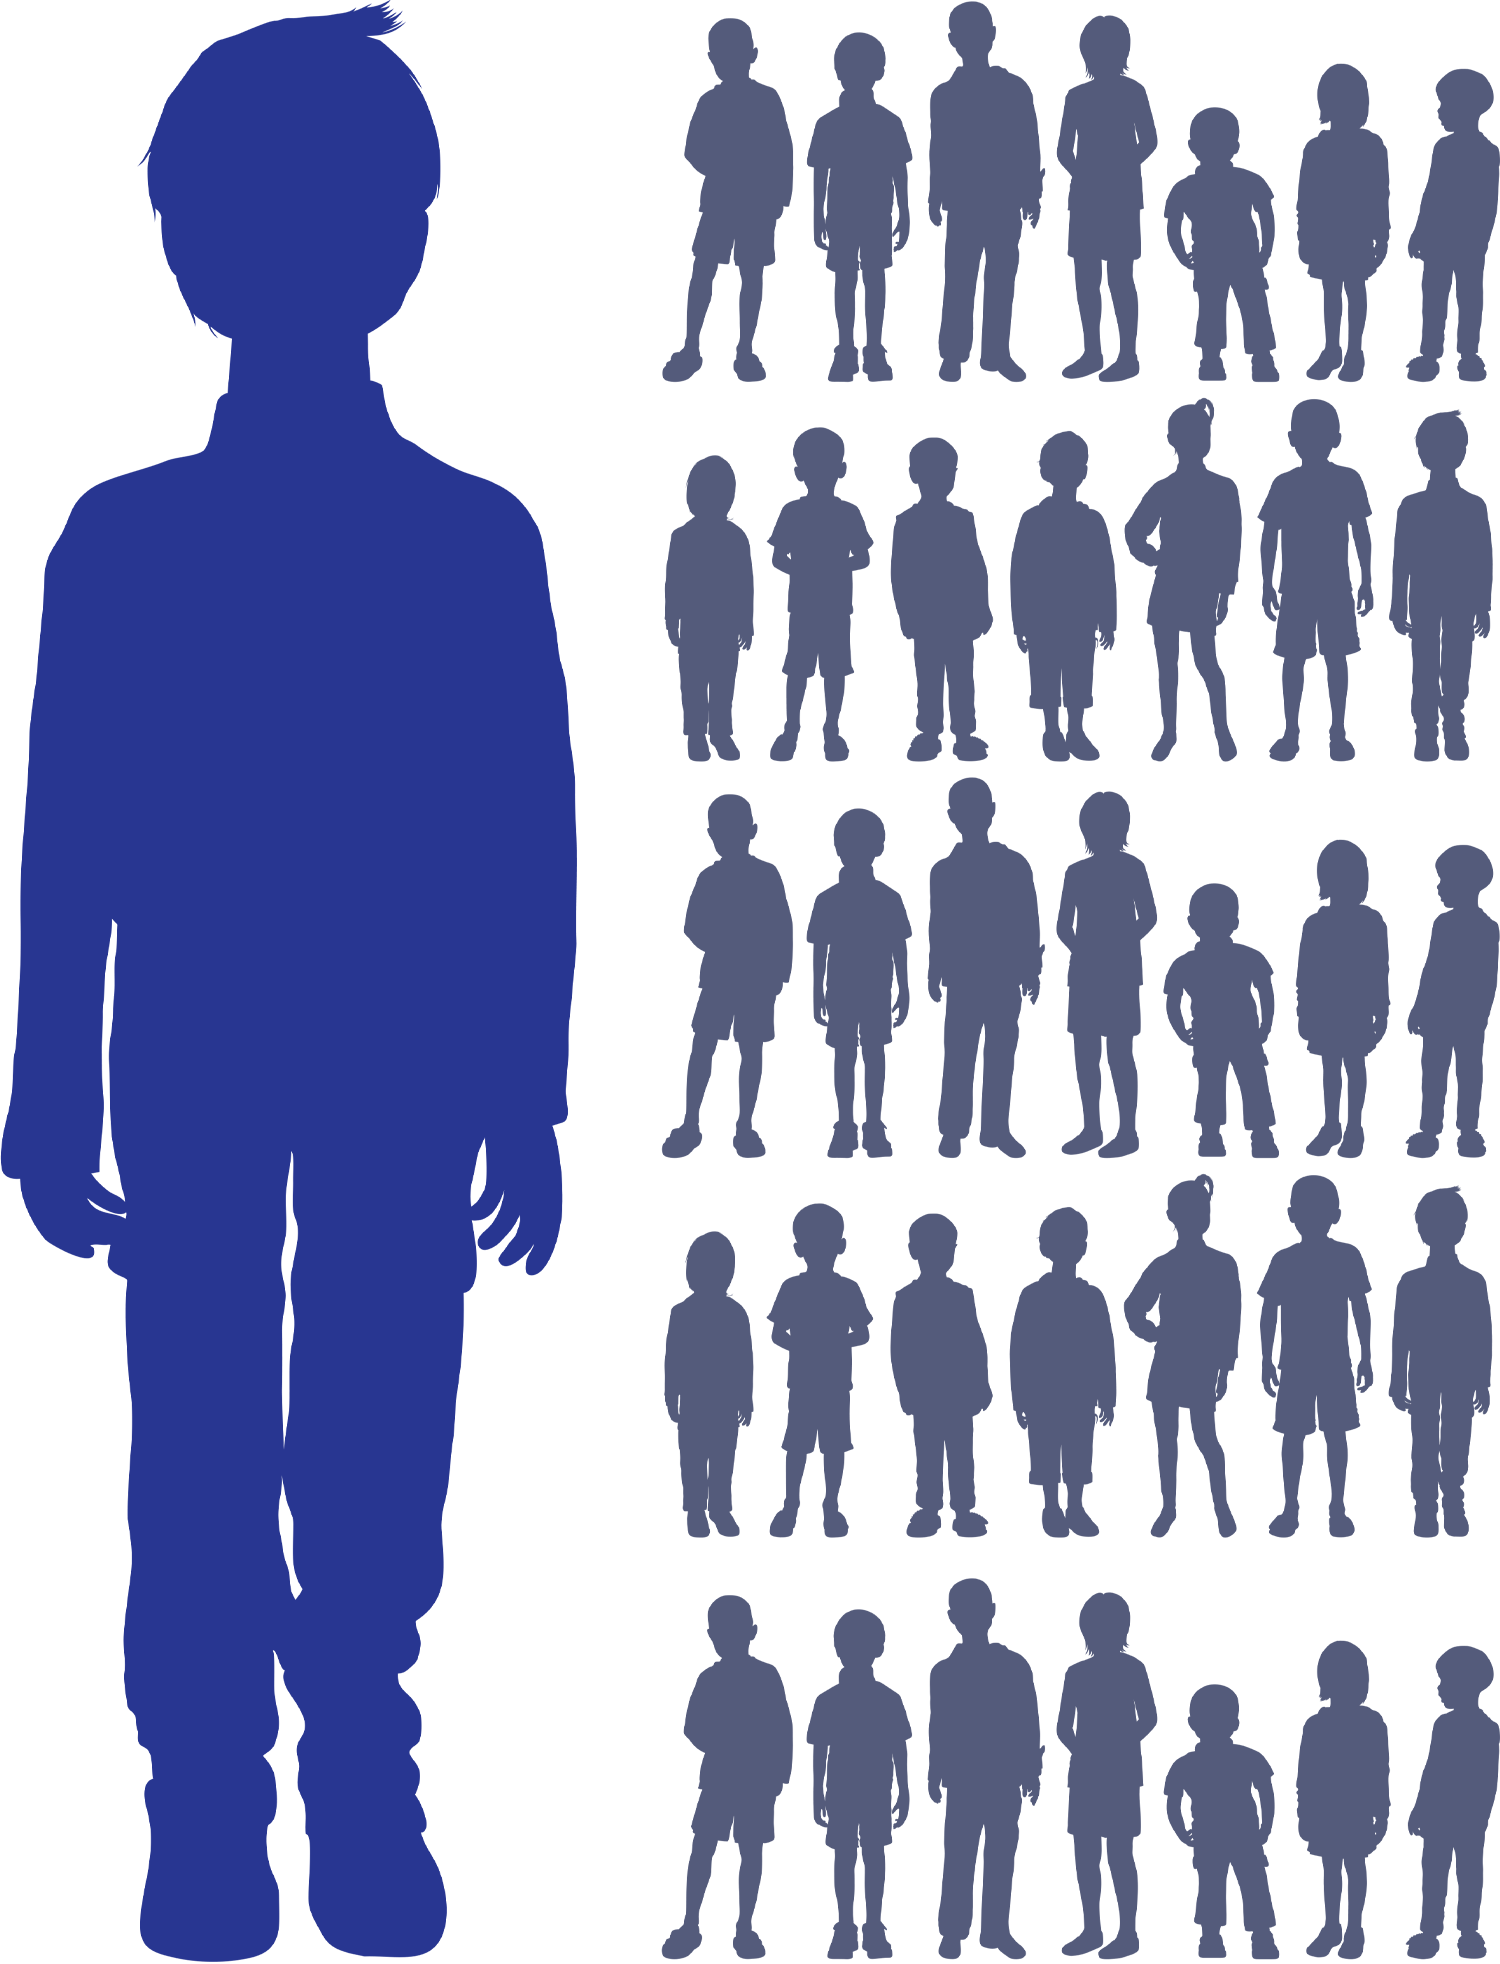 Illustration of one child standing out against 36 others